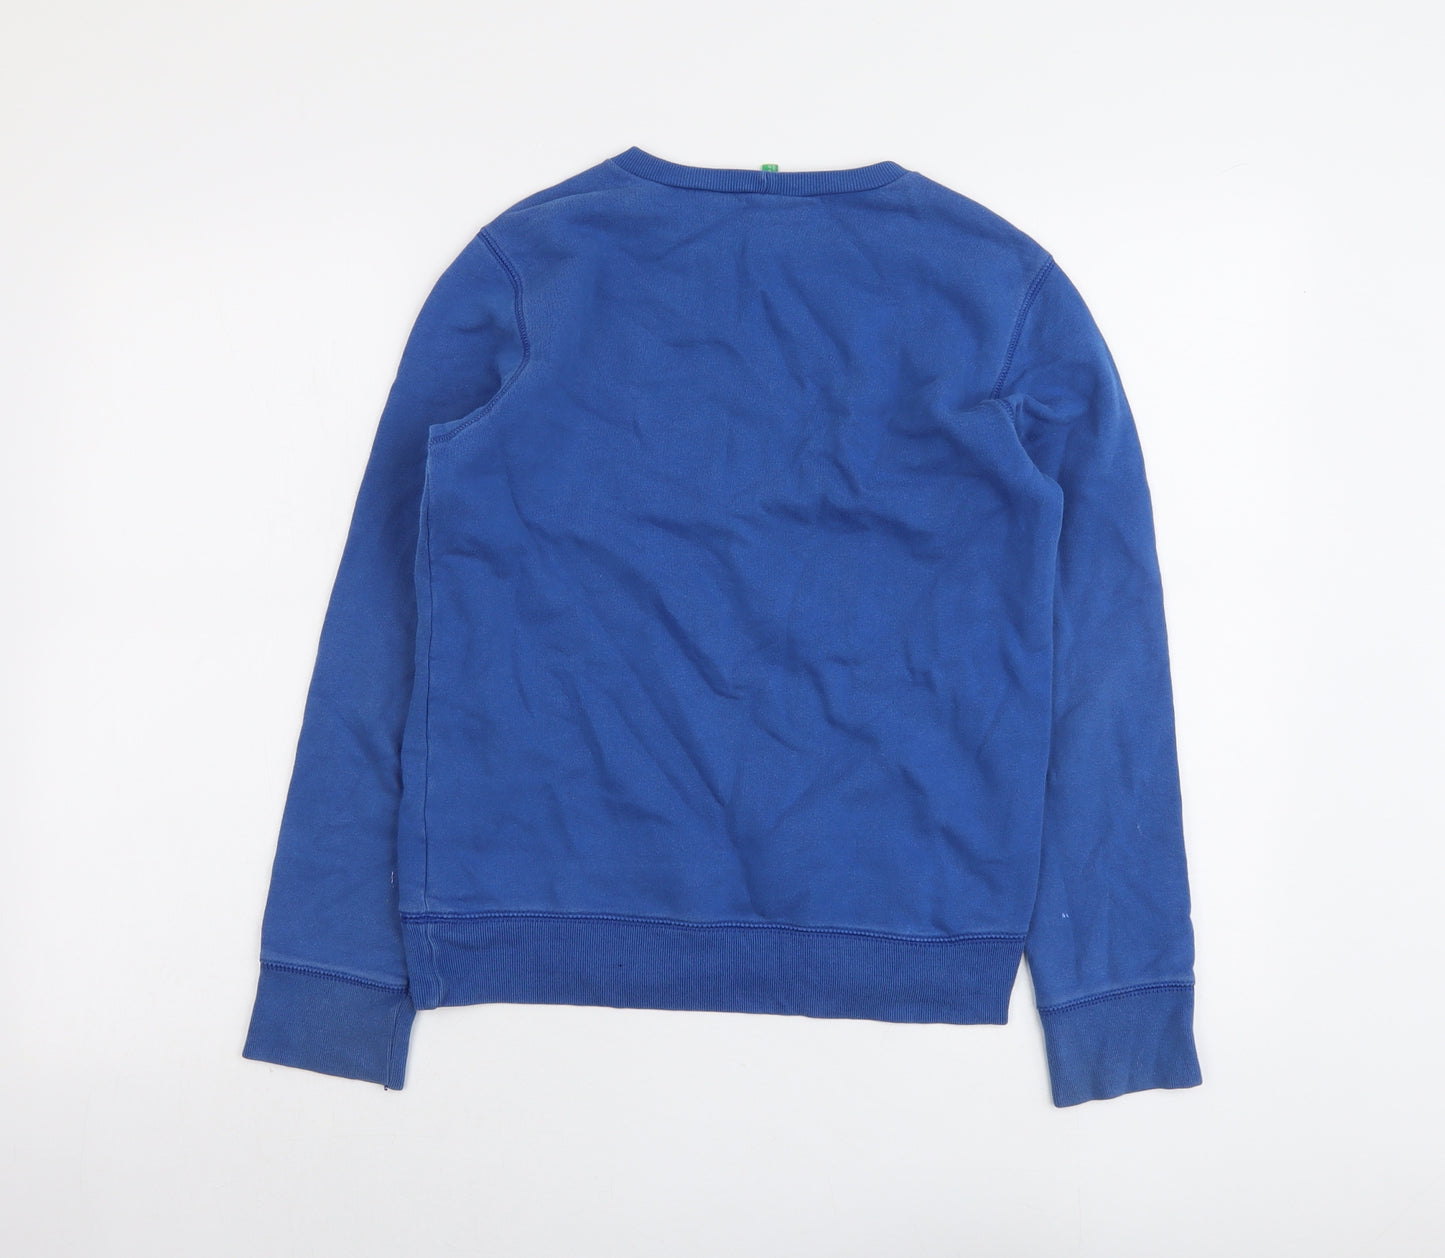 United Colors of Benetton Boys Blue Cotton Pullover Sweatshirt Size 11-12 Years Pullover